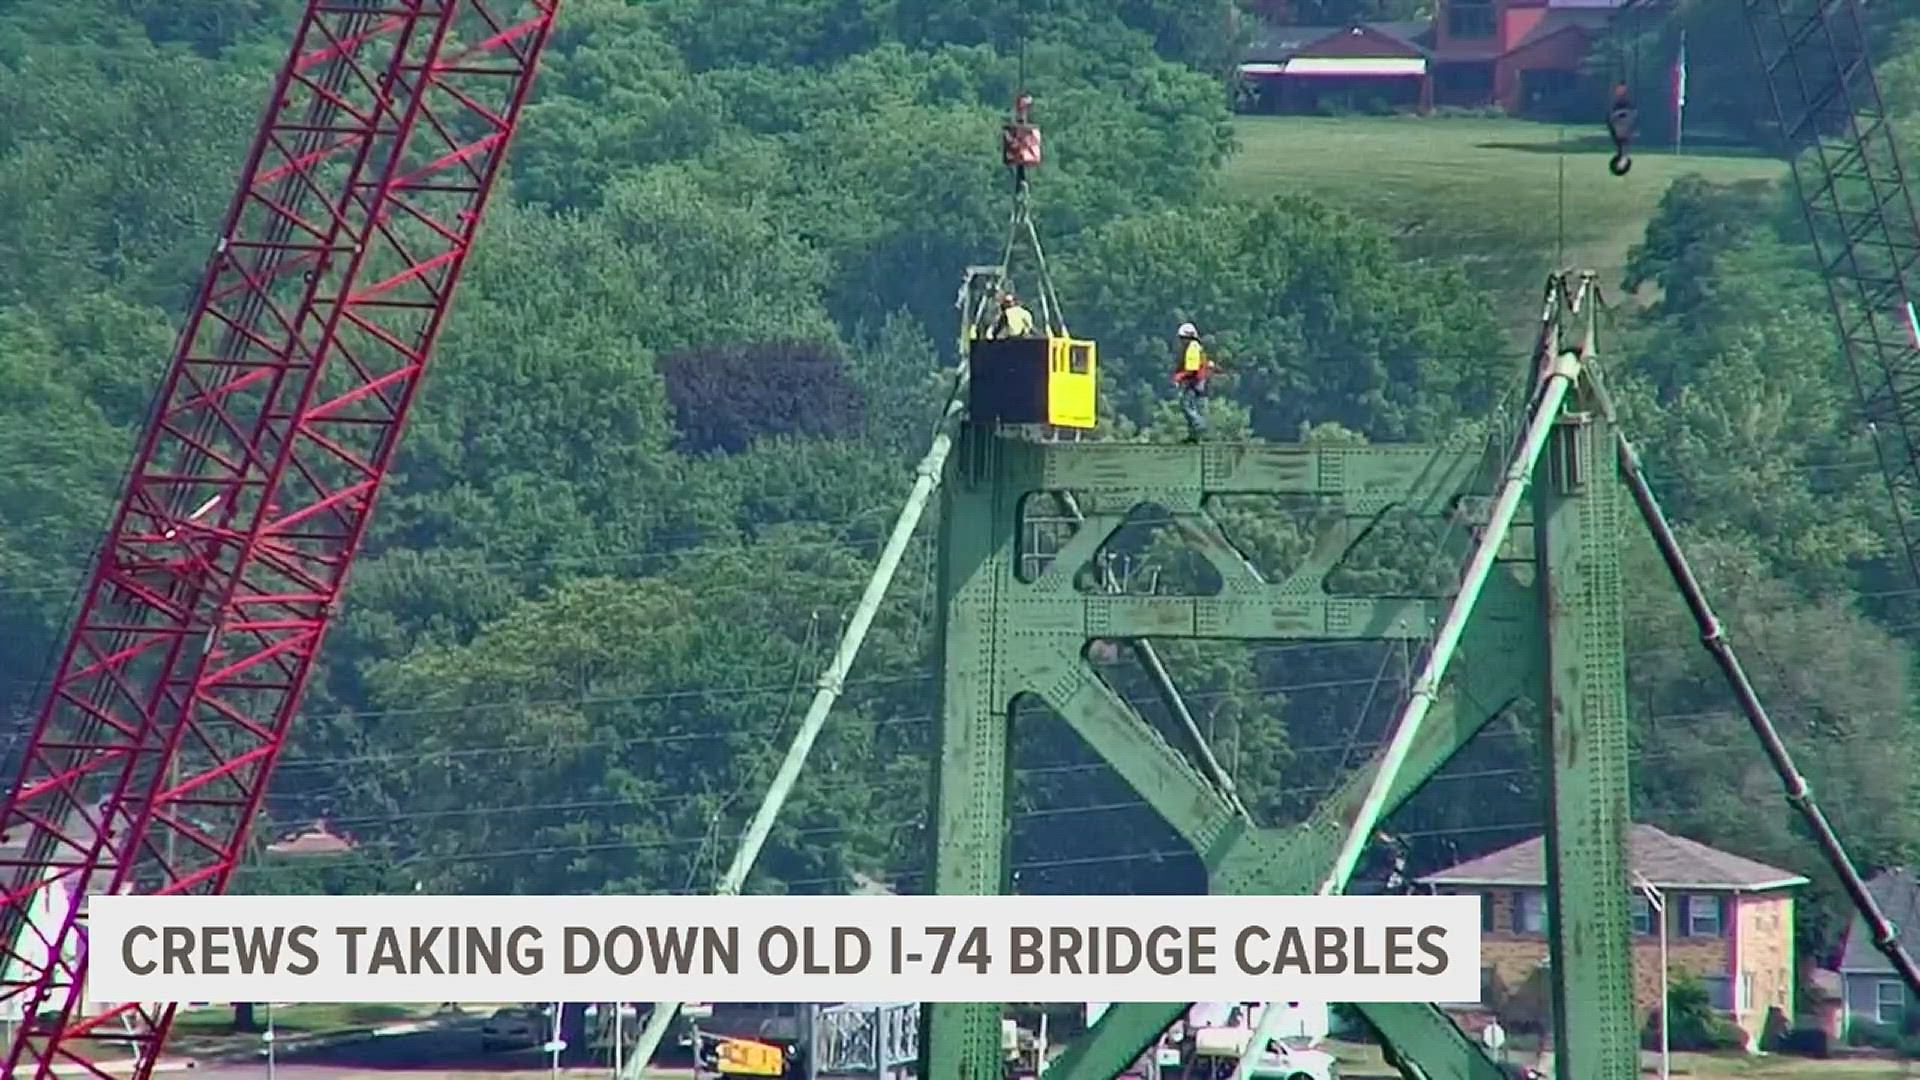 Crews took down the vertical support cables on the Illinois-bound side of the old I-74 Bridge on Thursday, June 1.